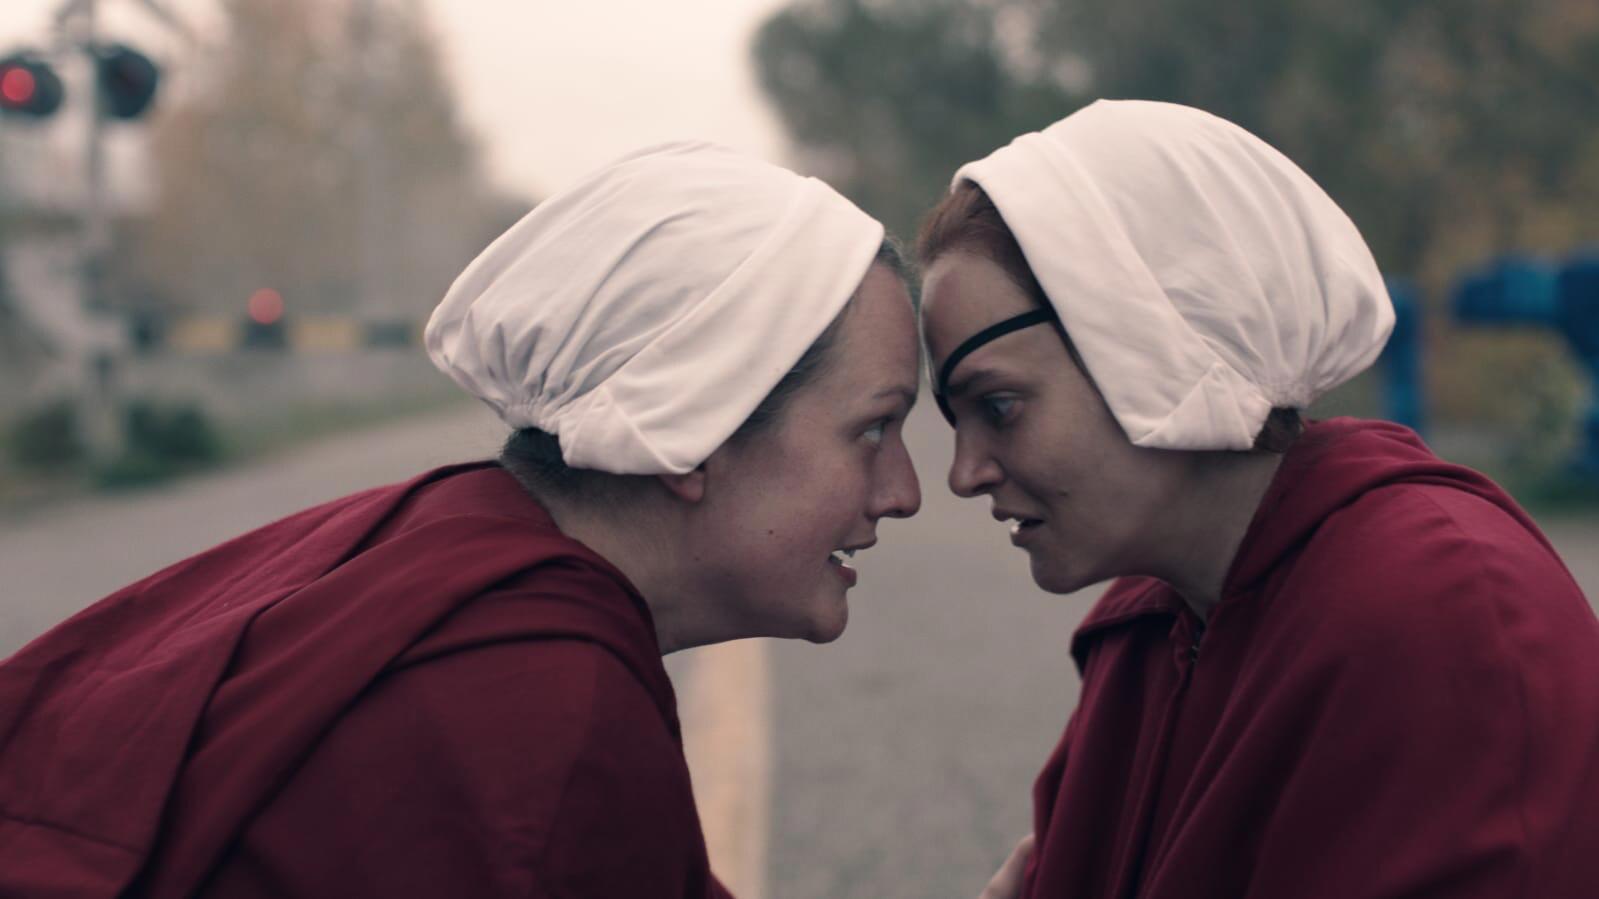 June placing her forehead against Janine's in 'The Handmaid's Tale' Season 4